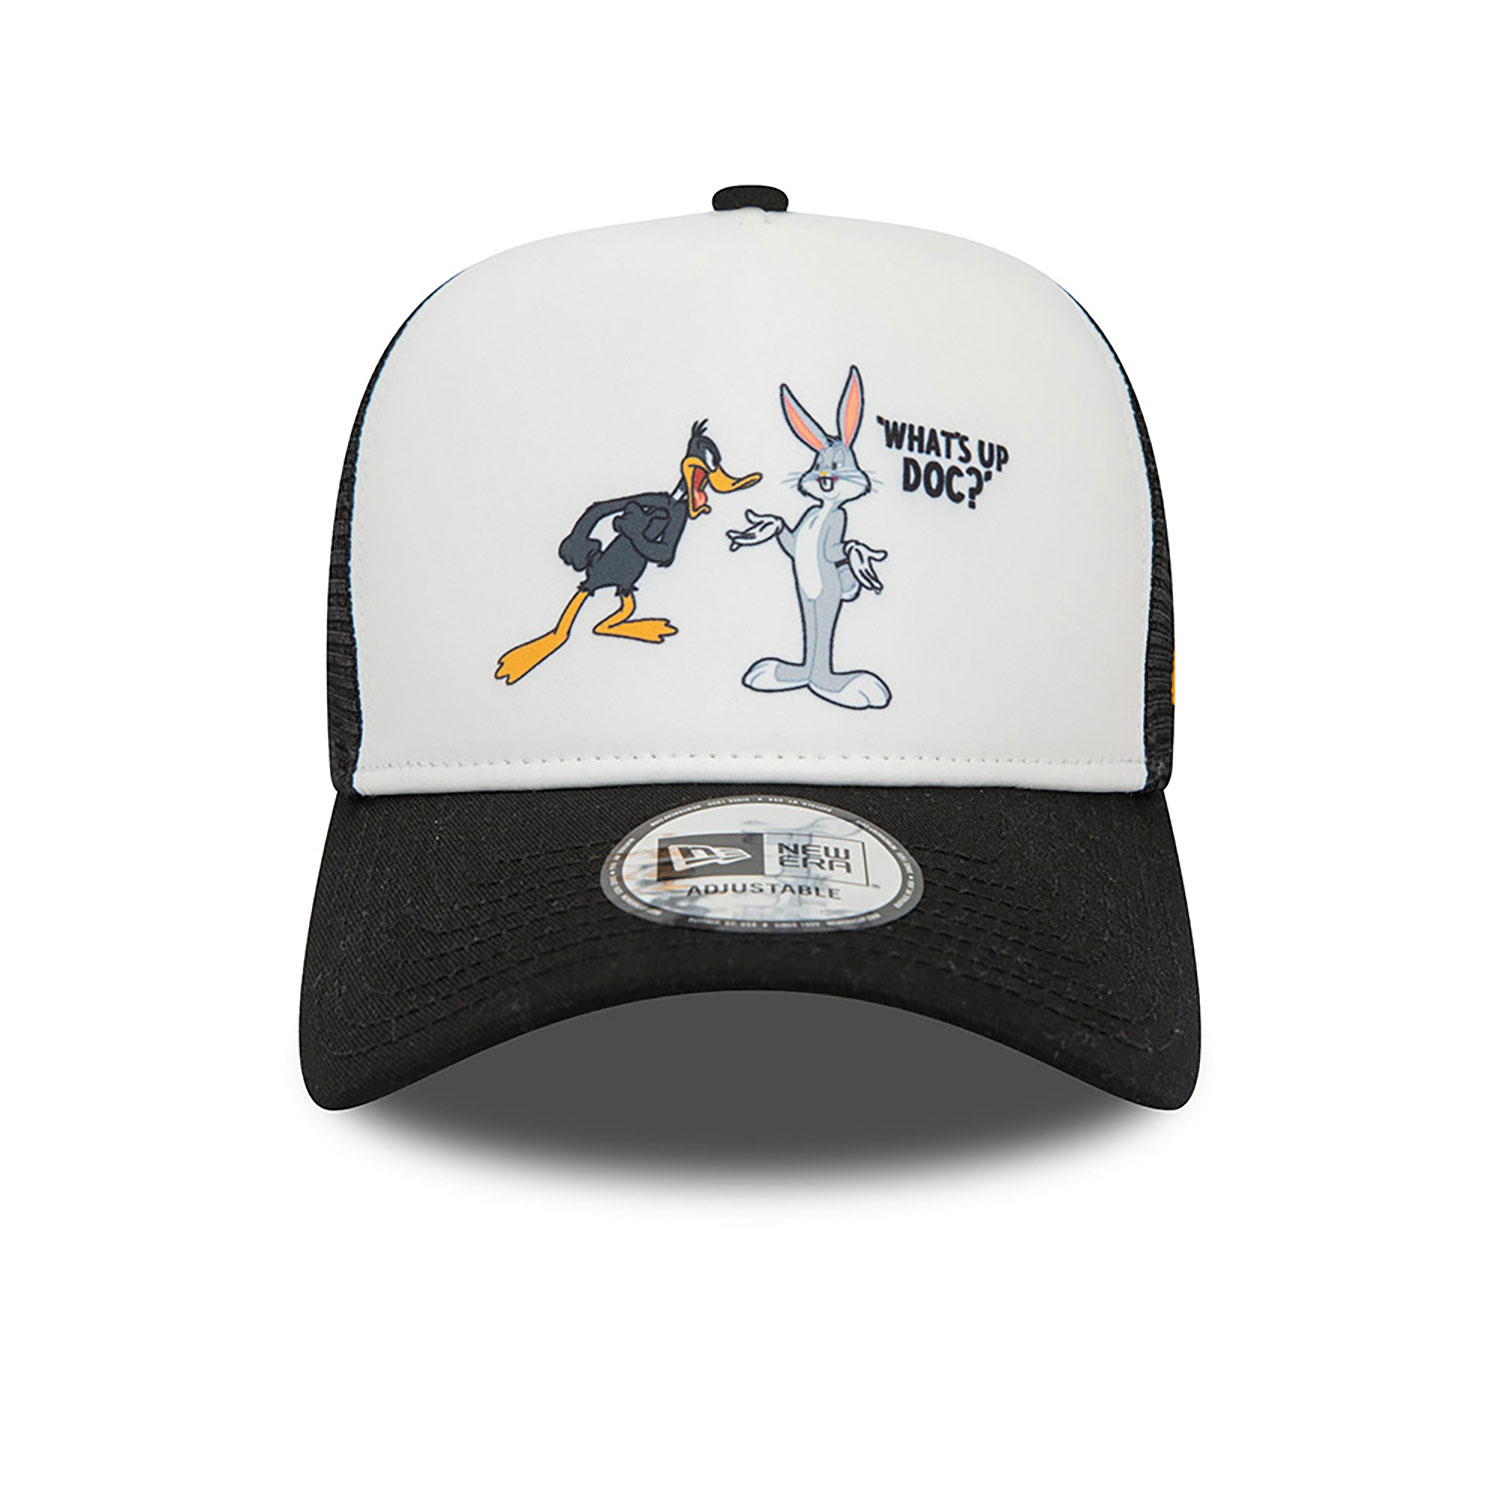 Multi Character Looney Tunes Daffy Duck and Bugs Bunny Black A-Frame Trucker Cap